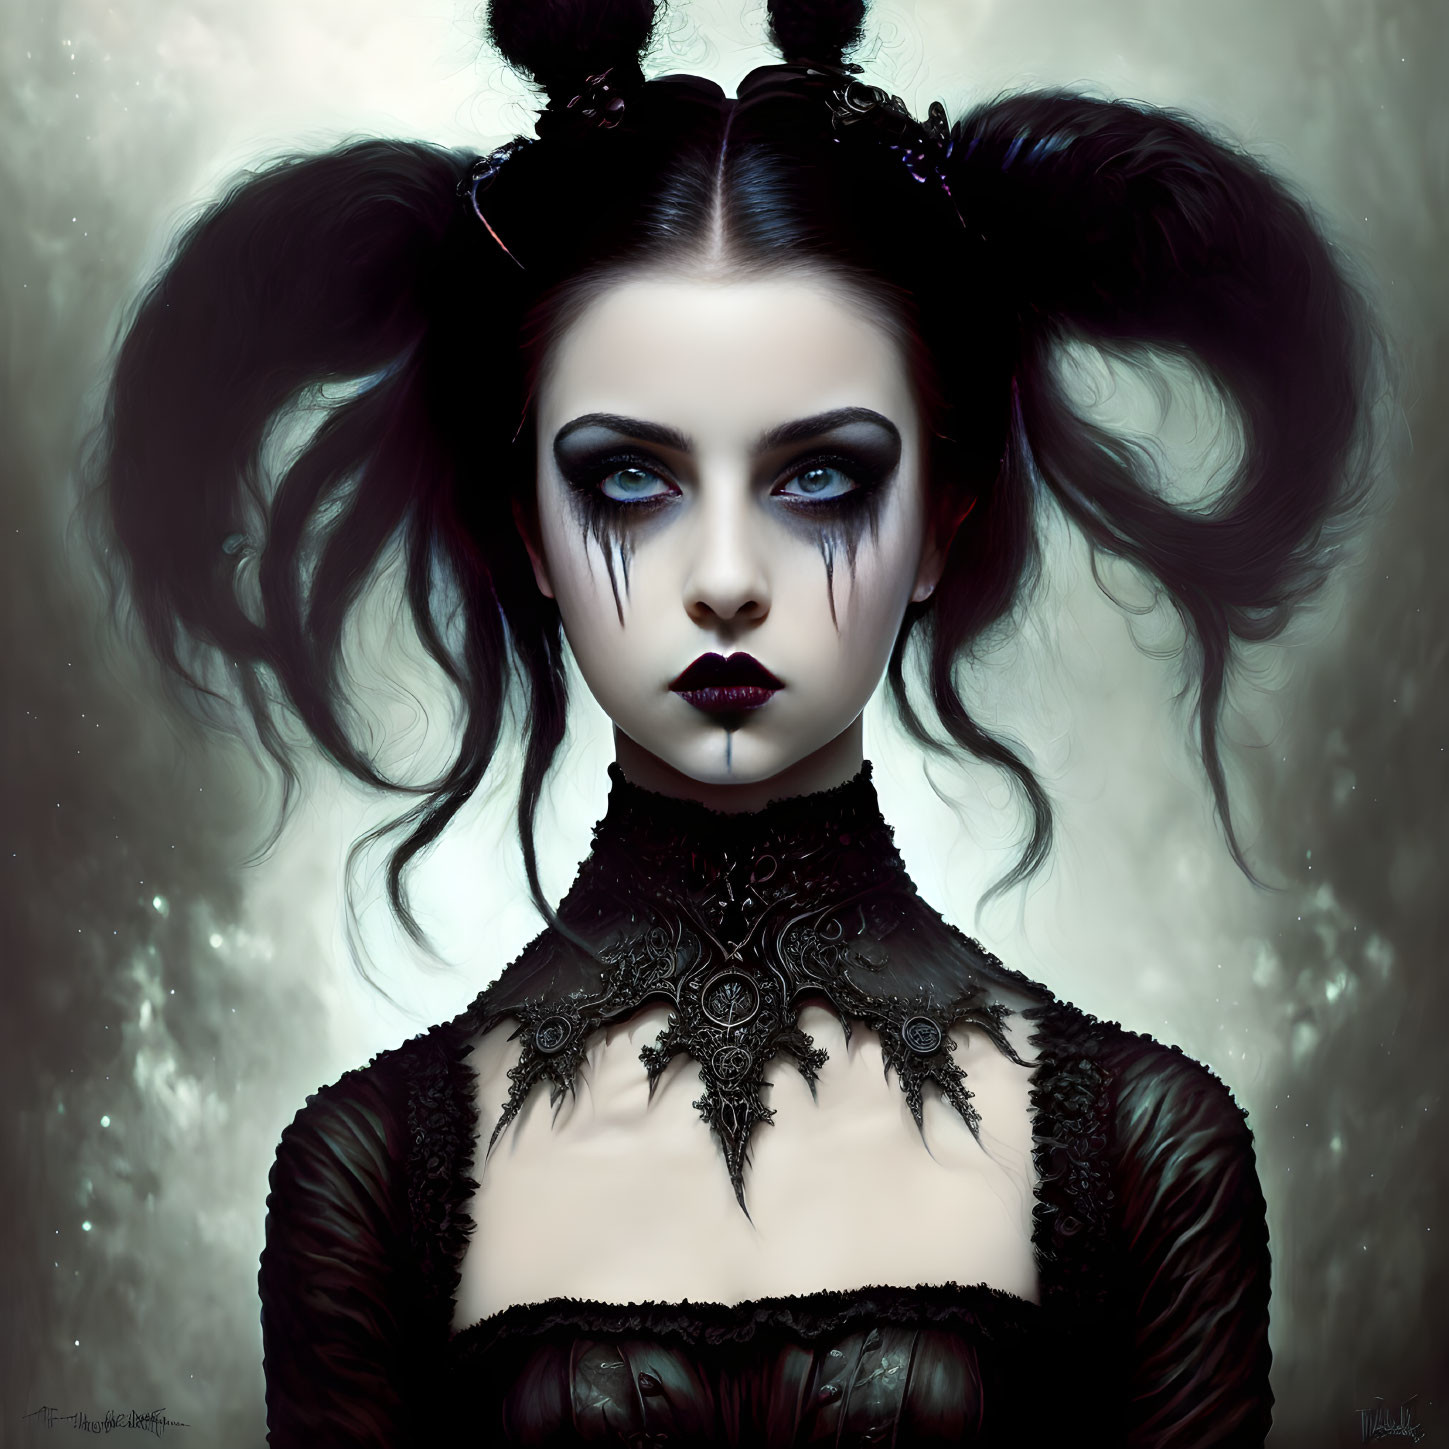 Gothic-style female figure with dark makeup and twin pigtails in intricate black attire against mist